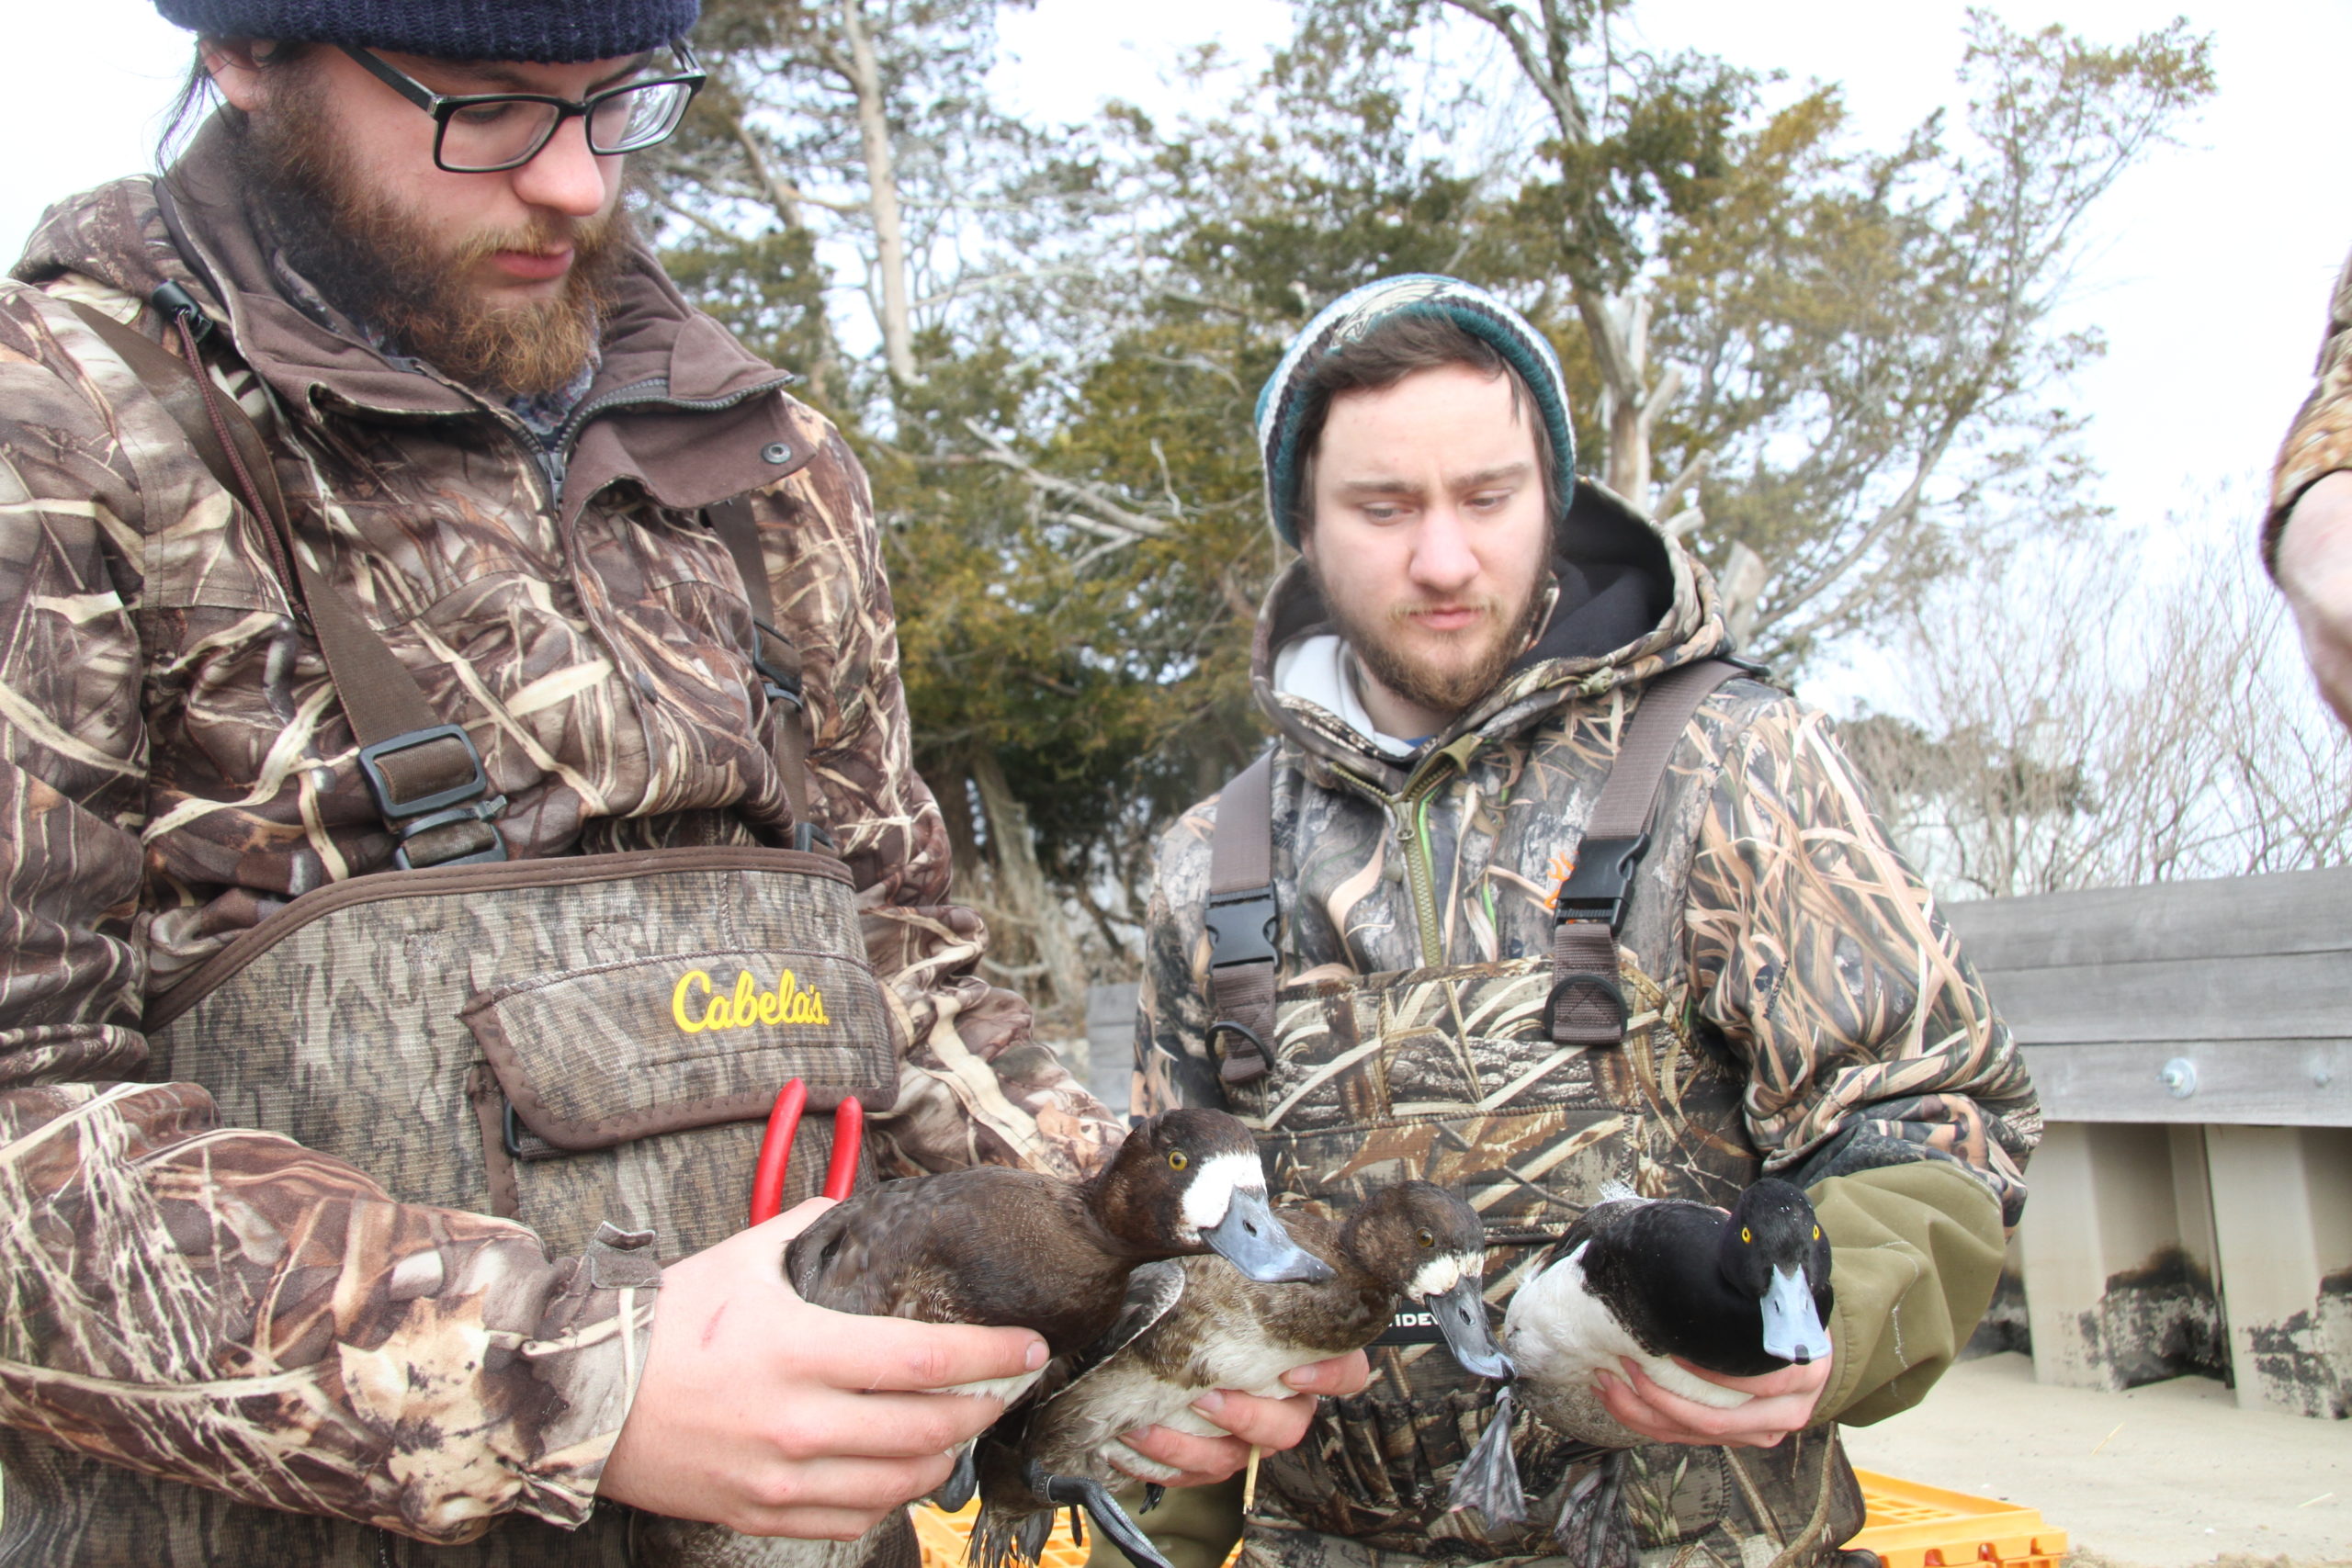 The Long Island Wildfowl Heritage Group and SUNY College of Environmental Science and Forestry are teaming up to band scaup ducks in local bays. 
MICHAEL WRIGHT